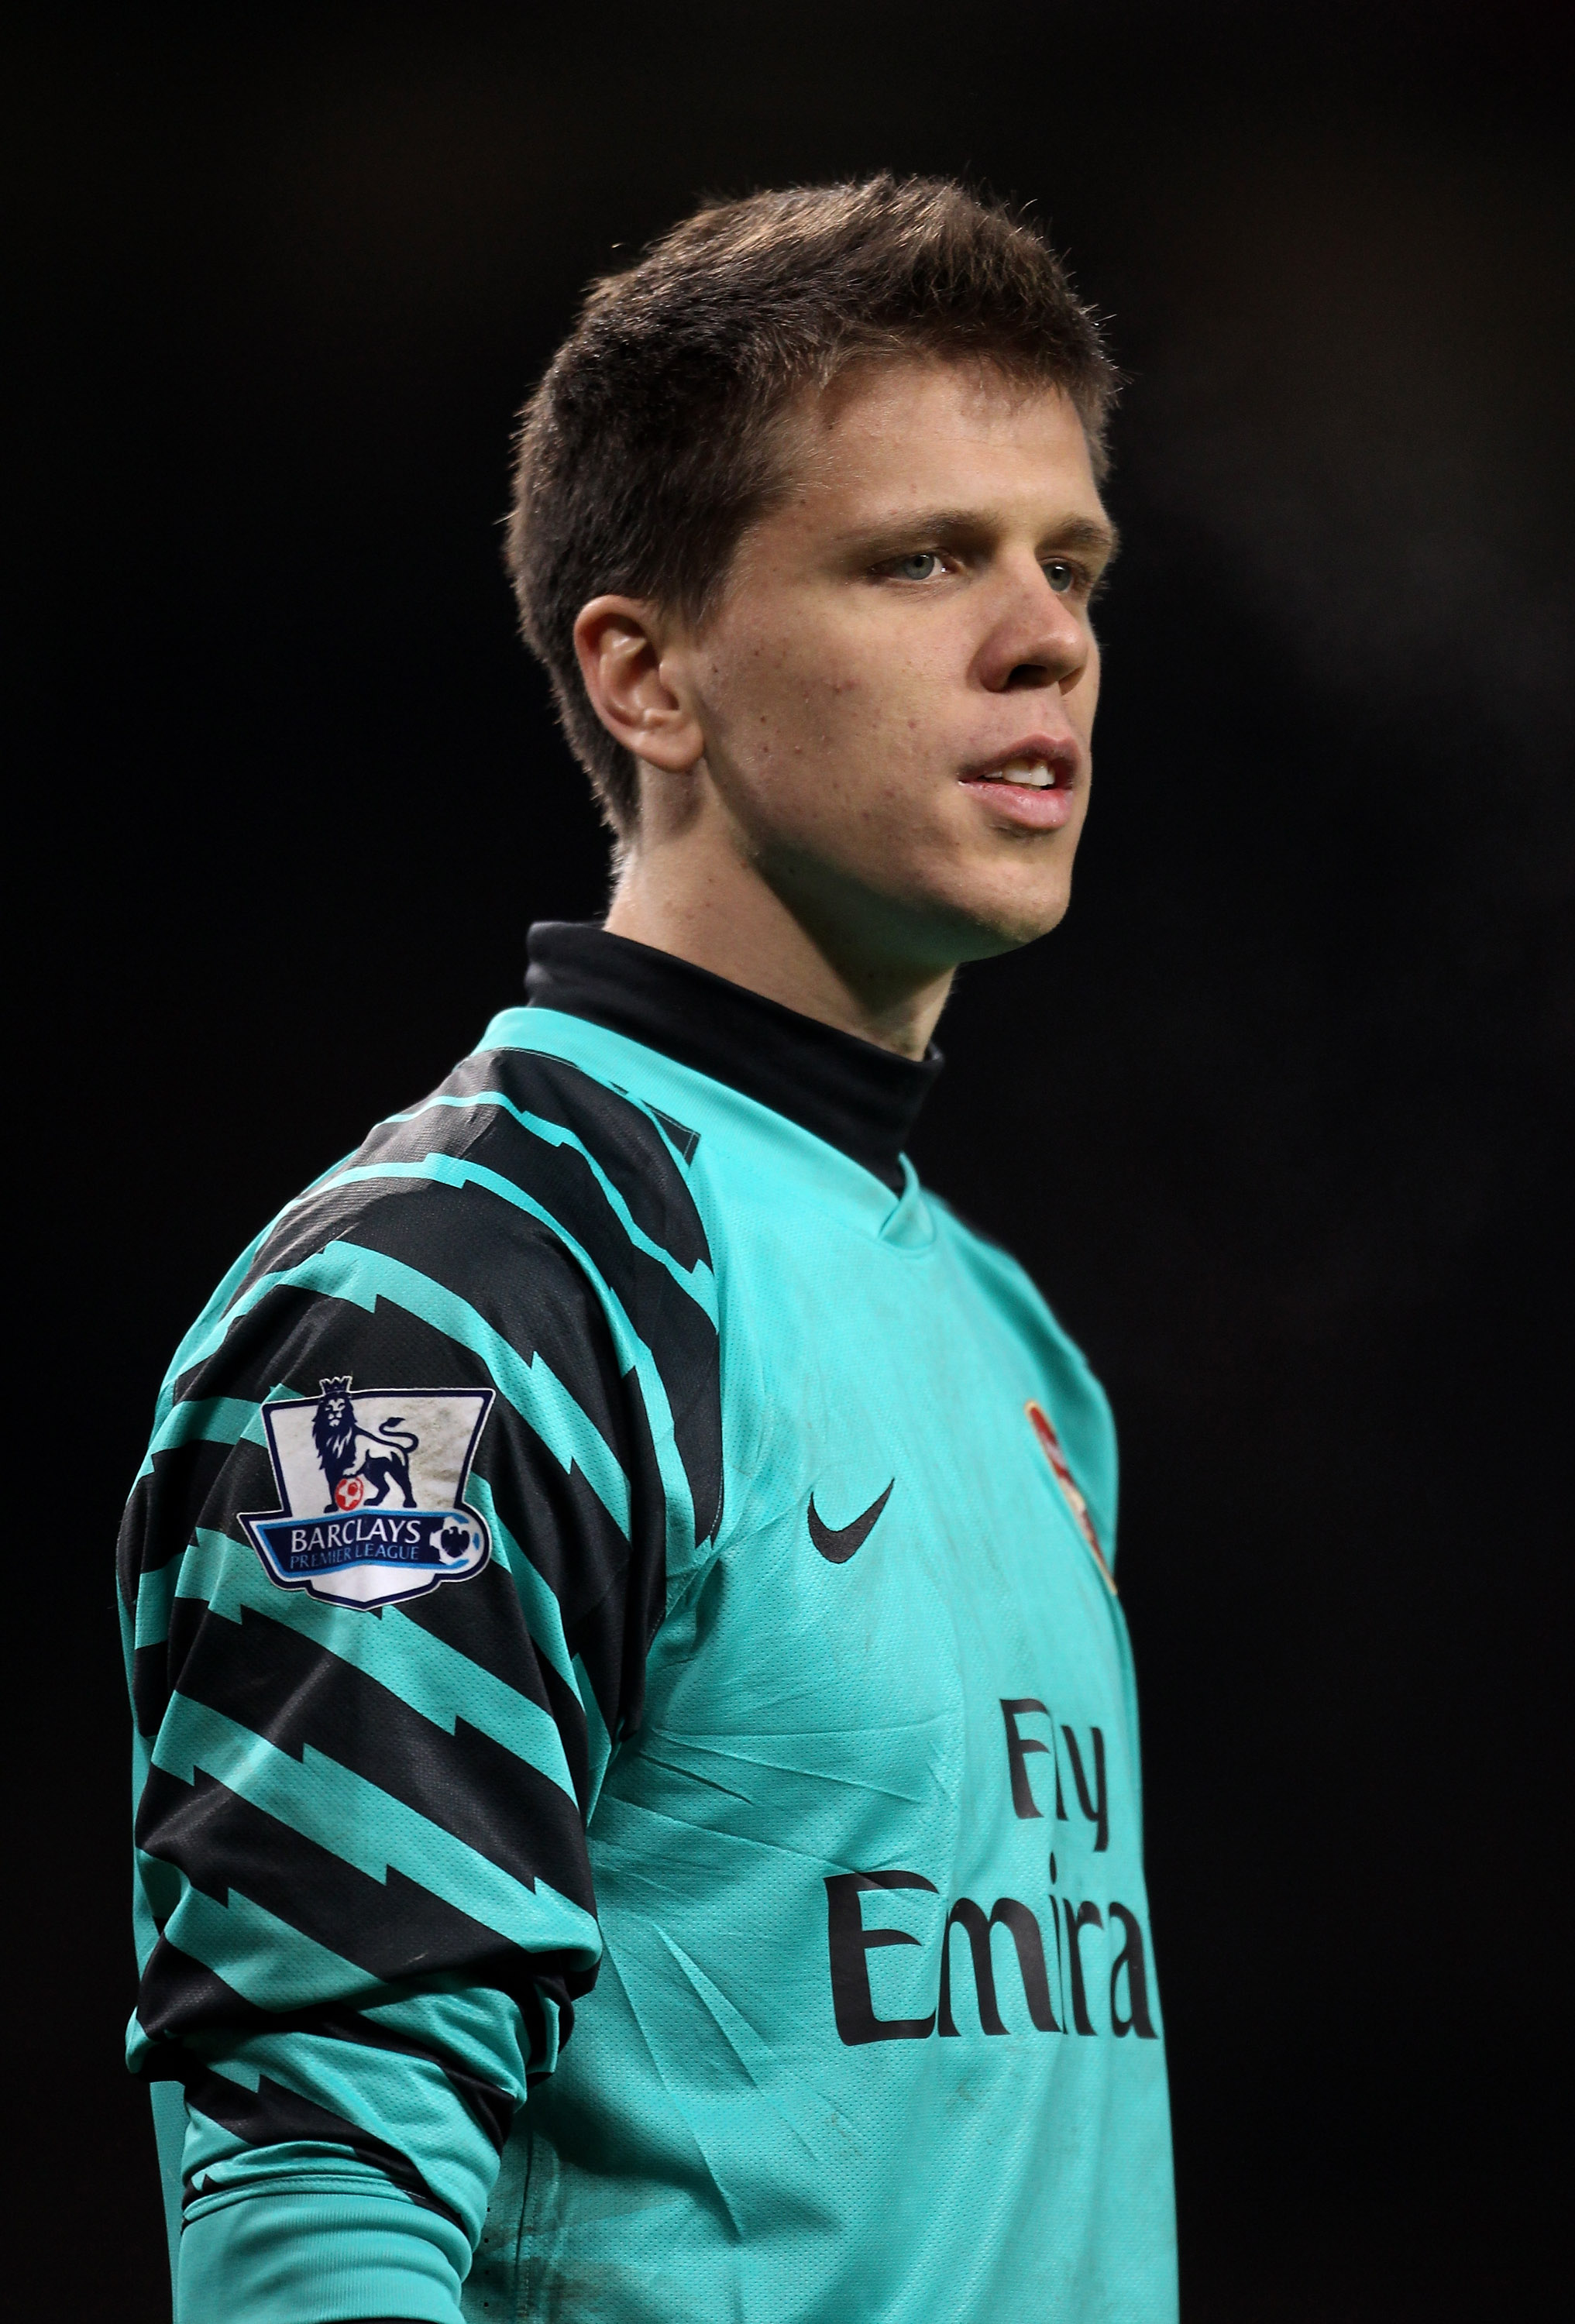 MANCHESTER, ENGLAND - DECEMBER 13:  Wojciech Szczesny of Arsenal looks on during the Barclays Premier League match between Manchester United and Arsenal at Old Trafford on December 13, 2010 in Manchester, England.  (Photo by Alex Livesey/Getty Images)